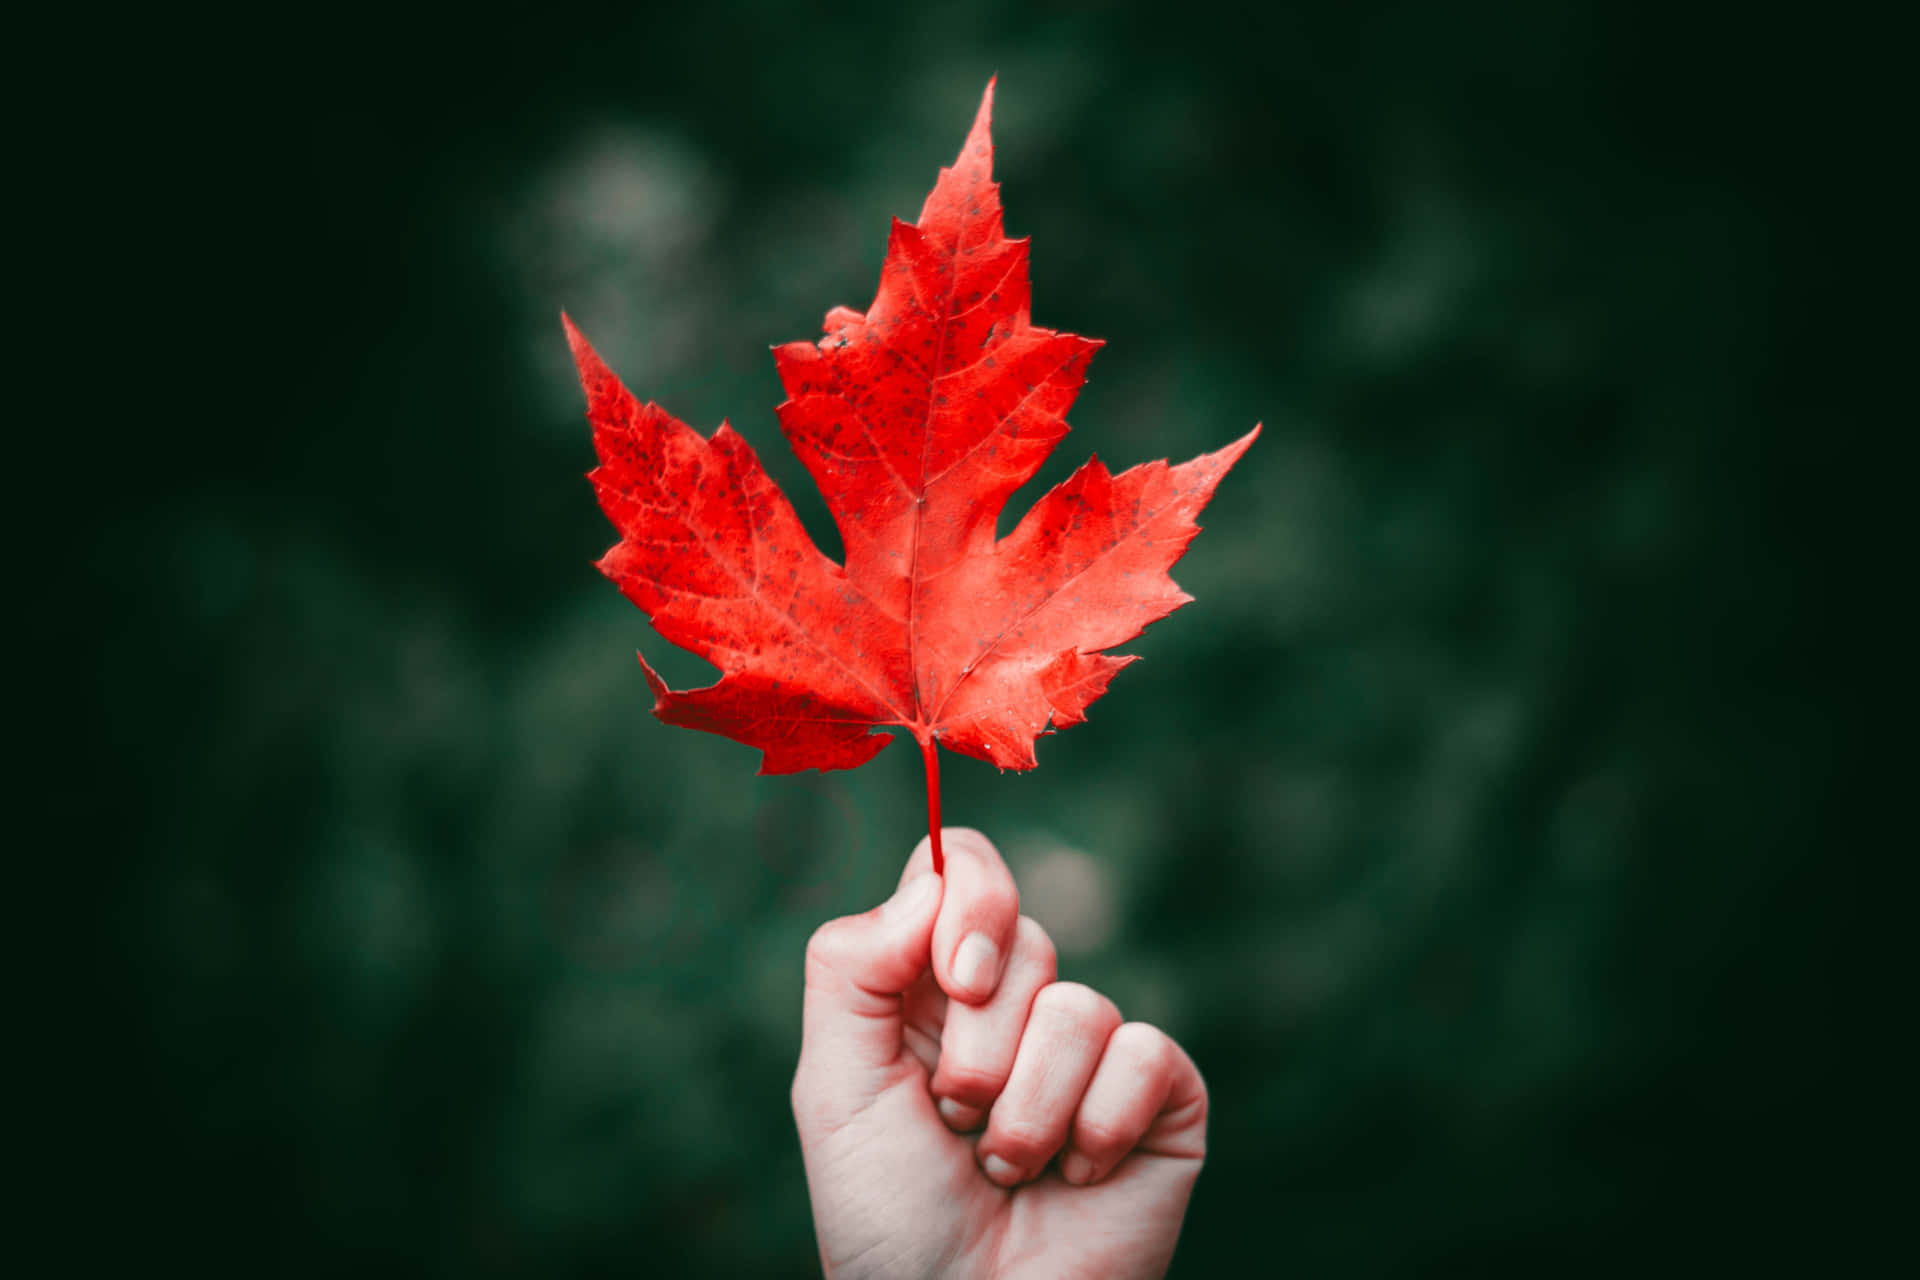 A majestic Maple Leaf in its beautiful red fall foliage